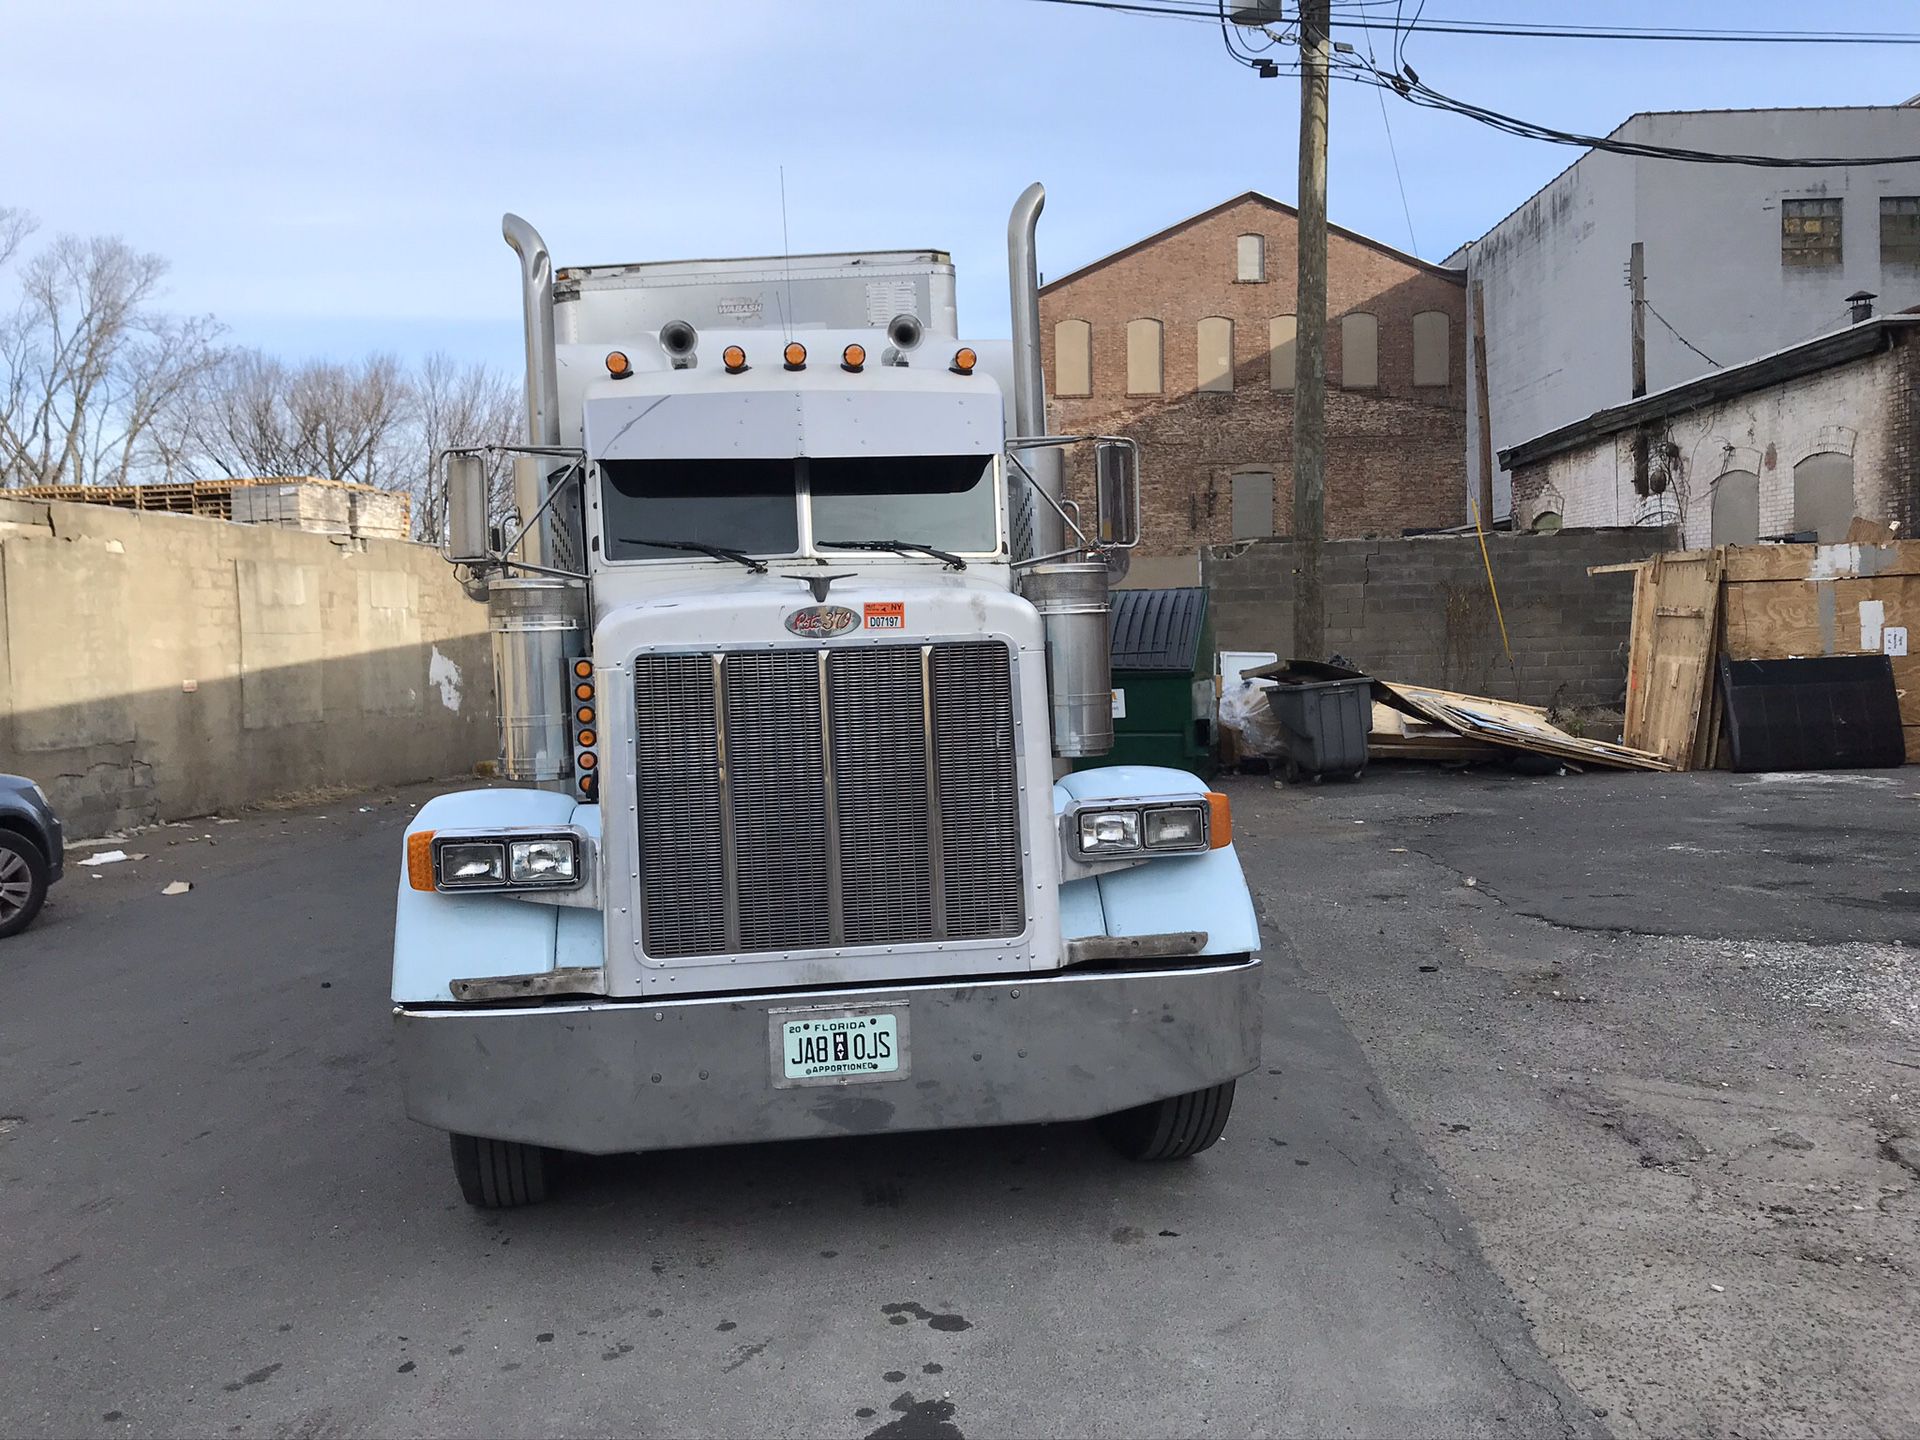 Photo Up for grabs 1999 Peterbilt 379 with a super 10speed Trans only 260,000 miles on fresh overhaul engine no E logs only $35,000